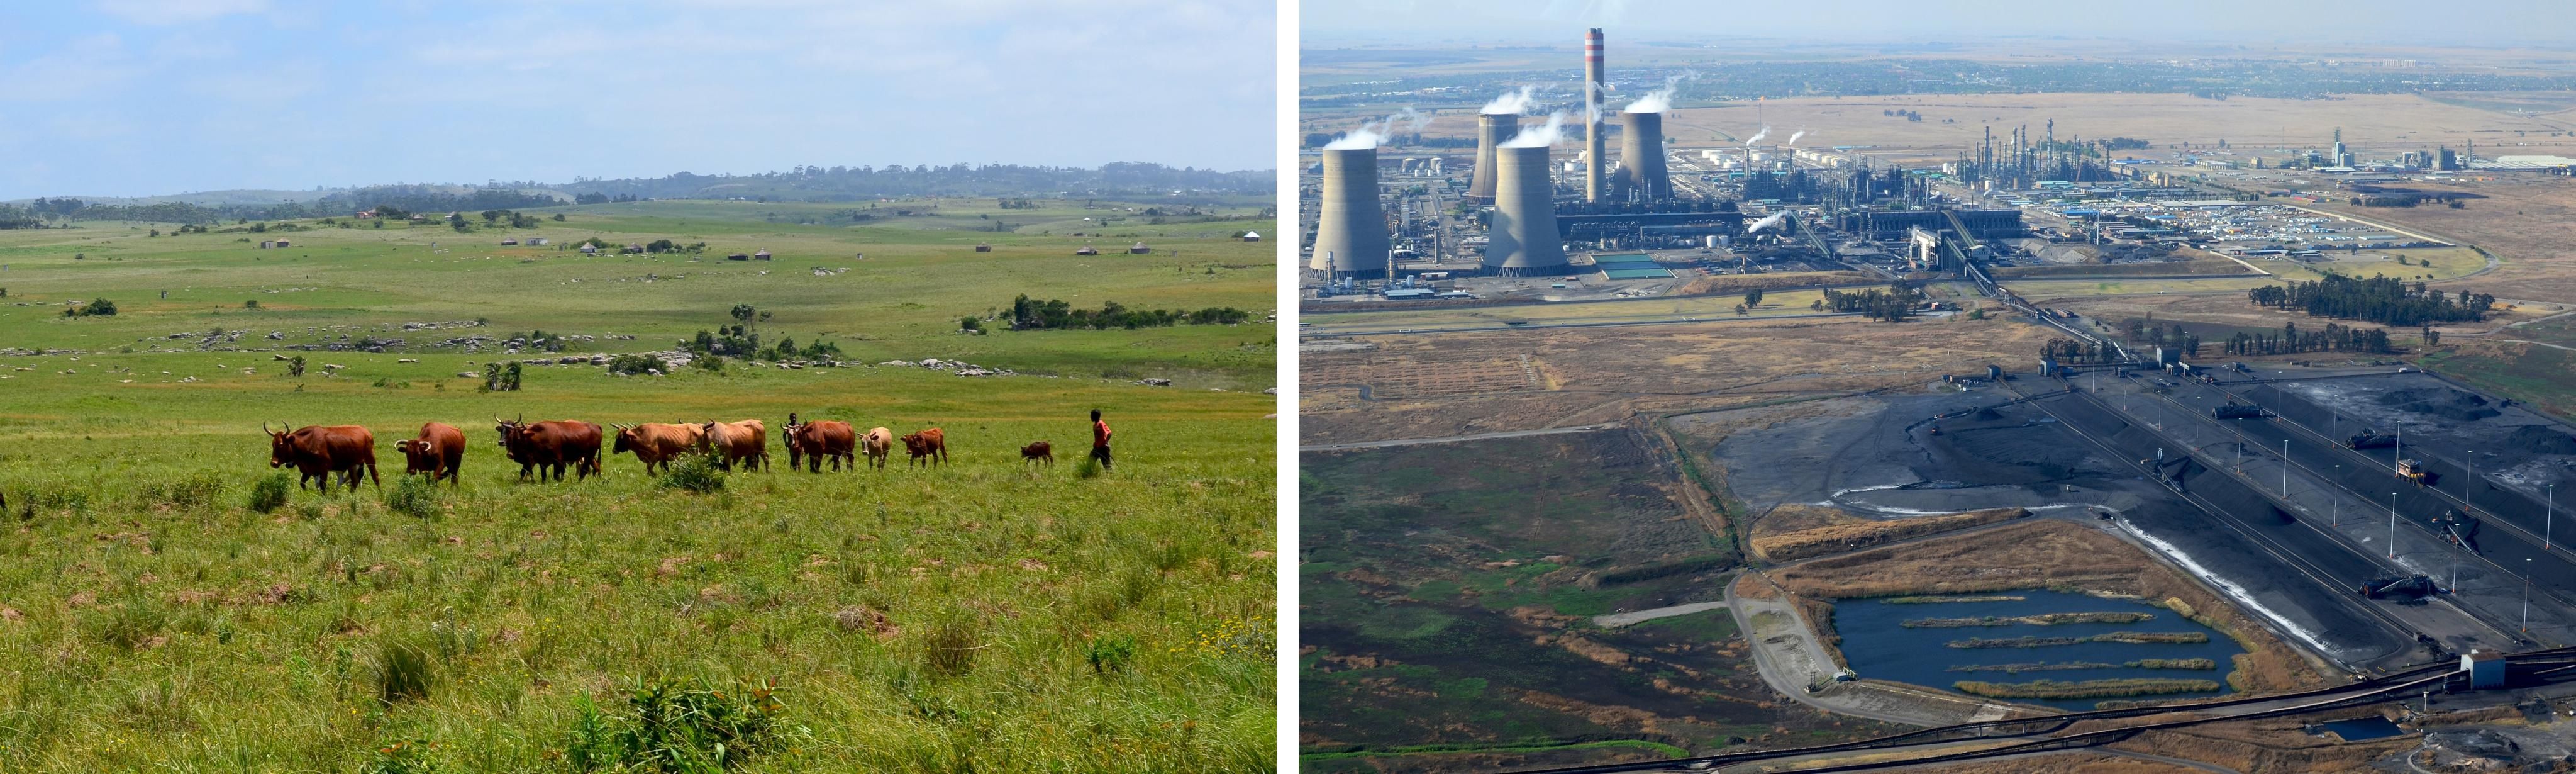 Left: Herdsmen guide their cows through Amadiba. Right: A chemical and coal refinery in Mpumalanga. Image by Mark Olalde. South Africa, 2017.